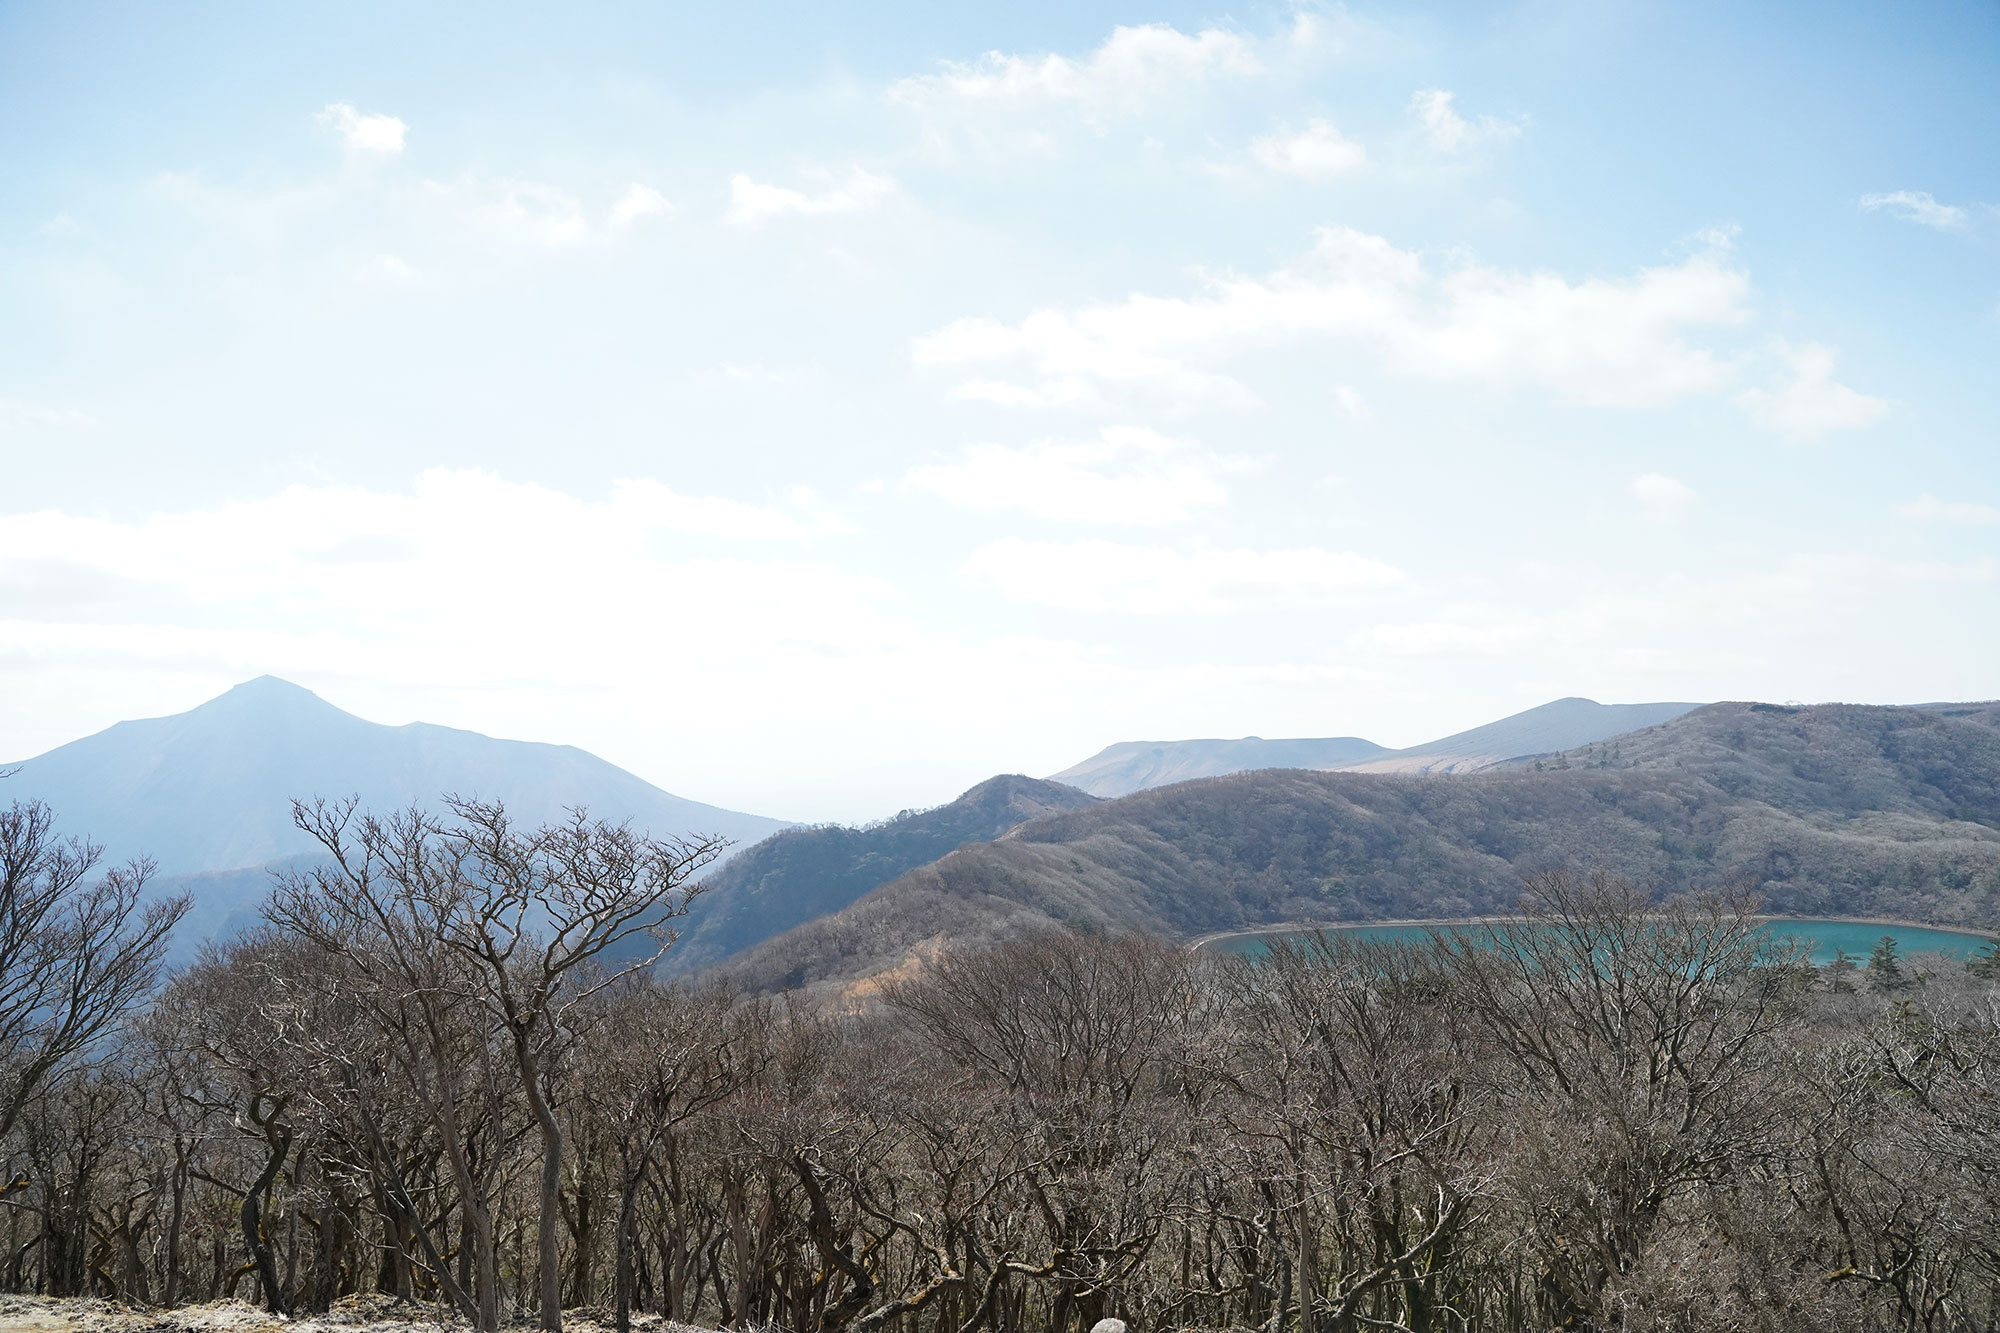 The view from the summit of Mt.Maruoka